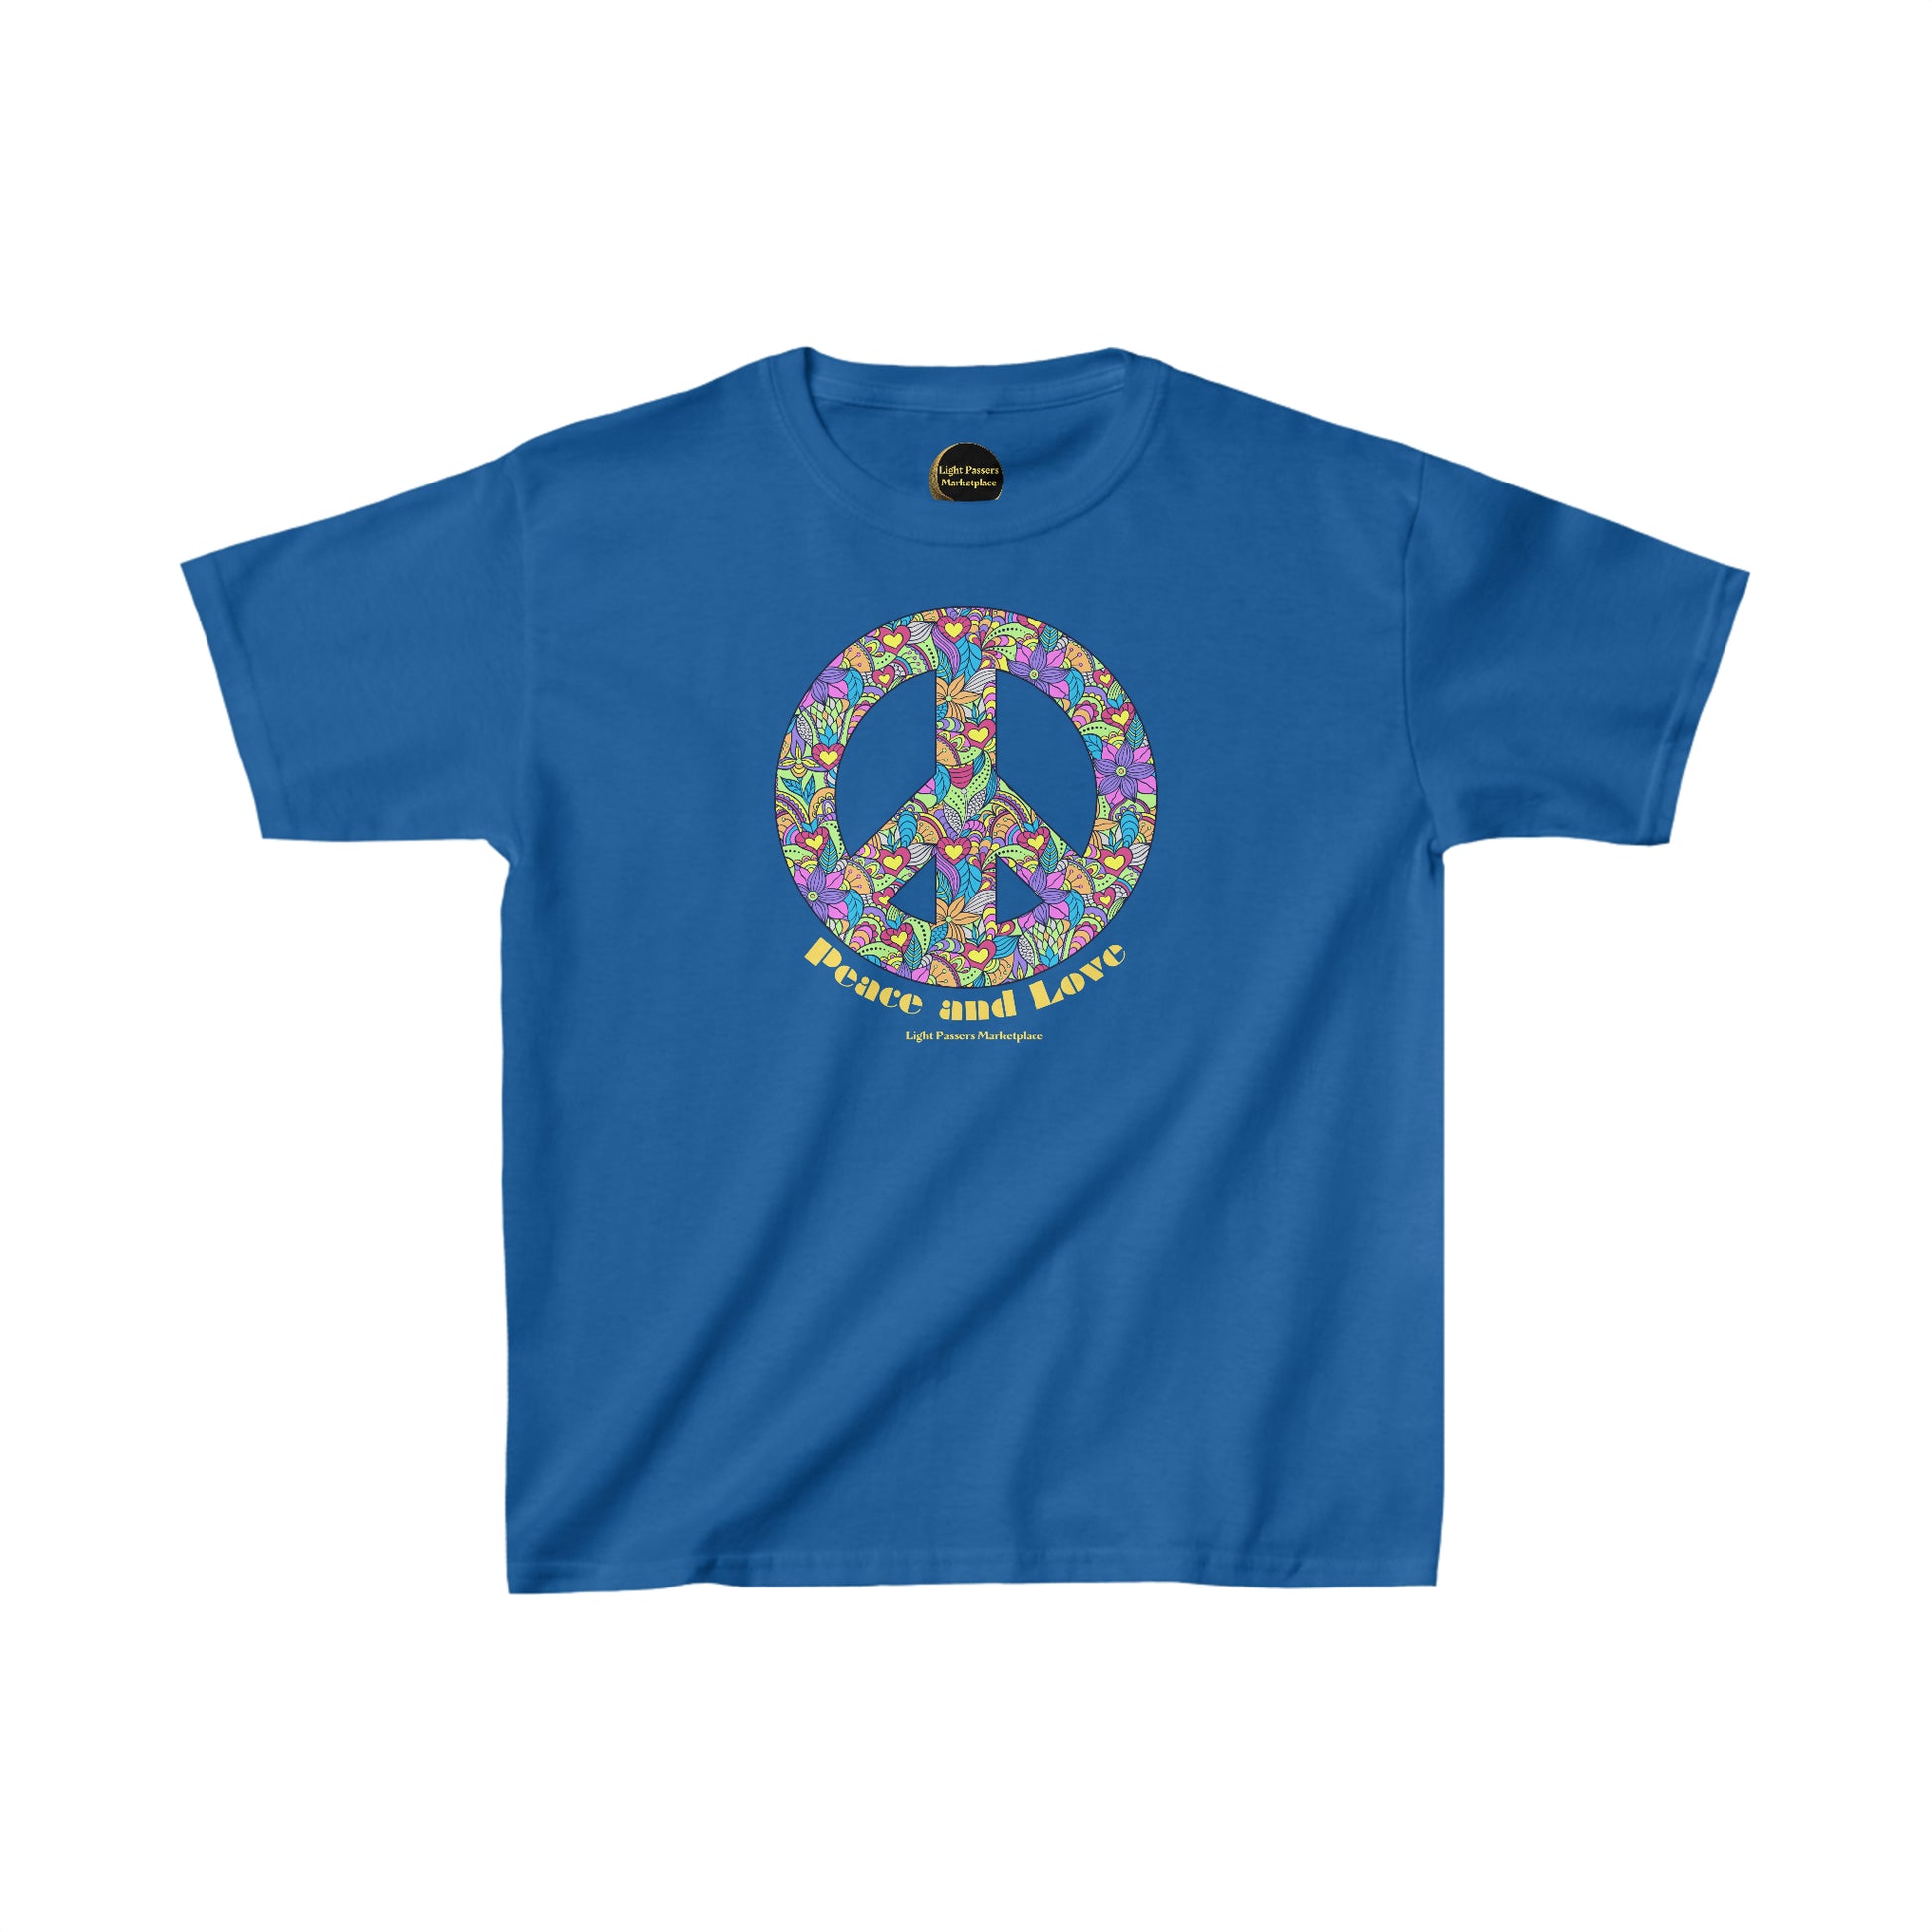 Youth cotton t-shirt featuring a peace sign with colorful flowers, ideal for everyday wear. Made of 100% US cotton, ribbed collar, tear-away labels, and ethical production.